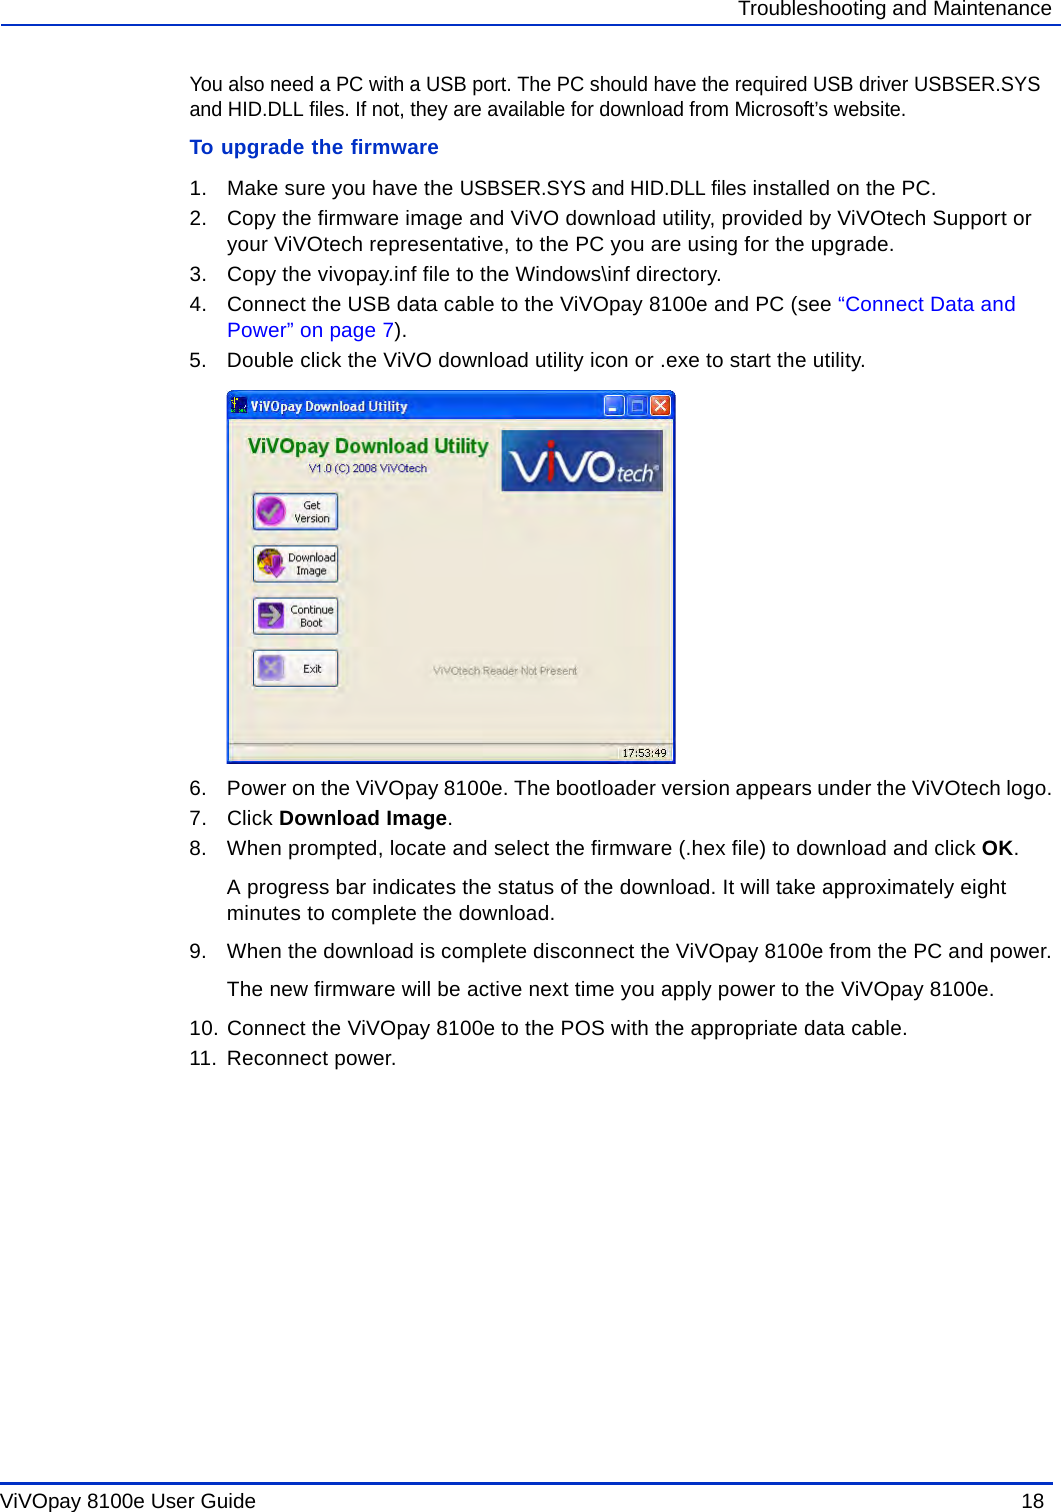 ViVOpay 8100e User Guide  18               Troubleshooting and MaintenanceYou also need a PC with a USB port. The PC should have the required USB driver USBSER.SYS and HID.DLL files. If not, they are available for download from Microsoft’s website.To upgrade the firmware1. Make sure you have the USBSER.SYS and HID.DLL files installed on the PC. 2. Copy the firmware image and ViVO download utility, provided by ViVOtech Support or your ViVOtech representative, to the PC you are using for the upgrade.3. Copy the vivopay.inf file to the Windows\inf directory.4. Connect the USB data cable to the ViVOpay 8100e and PC (see “Connect Data and Power” on page 7). 5. Double click the ViVO download utility icon or .exe to start the utility.6. Power on the ViVOpay 8100e. The bootloader version appears under the ViVOtech logo.7. Click Download Image.8. When prompted, locate and select the firmware (.hex file) to download and click OK.A progress bar indicates the status of the download. It will take approximately eight minutes to complete the download.9. When the download is complete disconnect the ViVOpay 8100e from the PC and power.The new firmware will be active next time you apply power to the ViVOpay 8100e.10. Connect the ViVOpay 8100e to the POS with the appropriate data cable.11. Reconnect power.